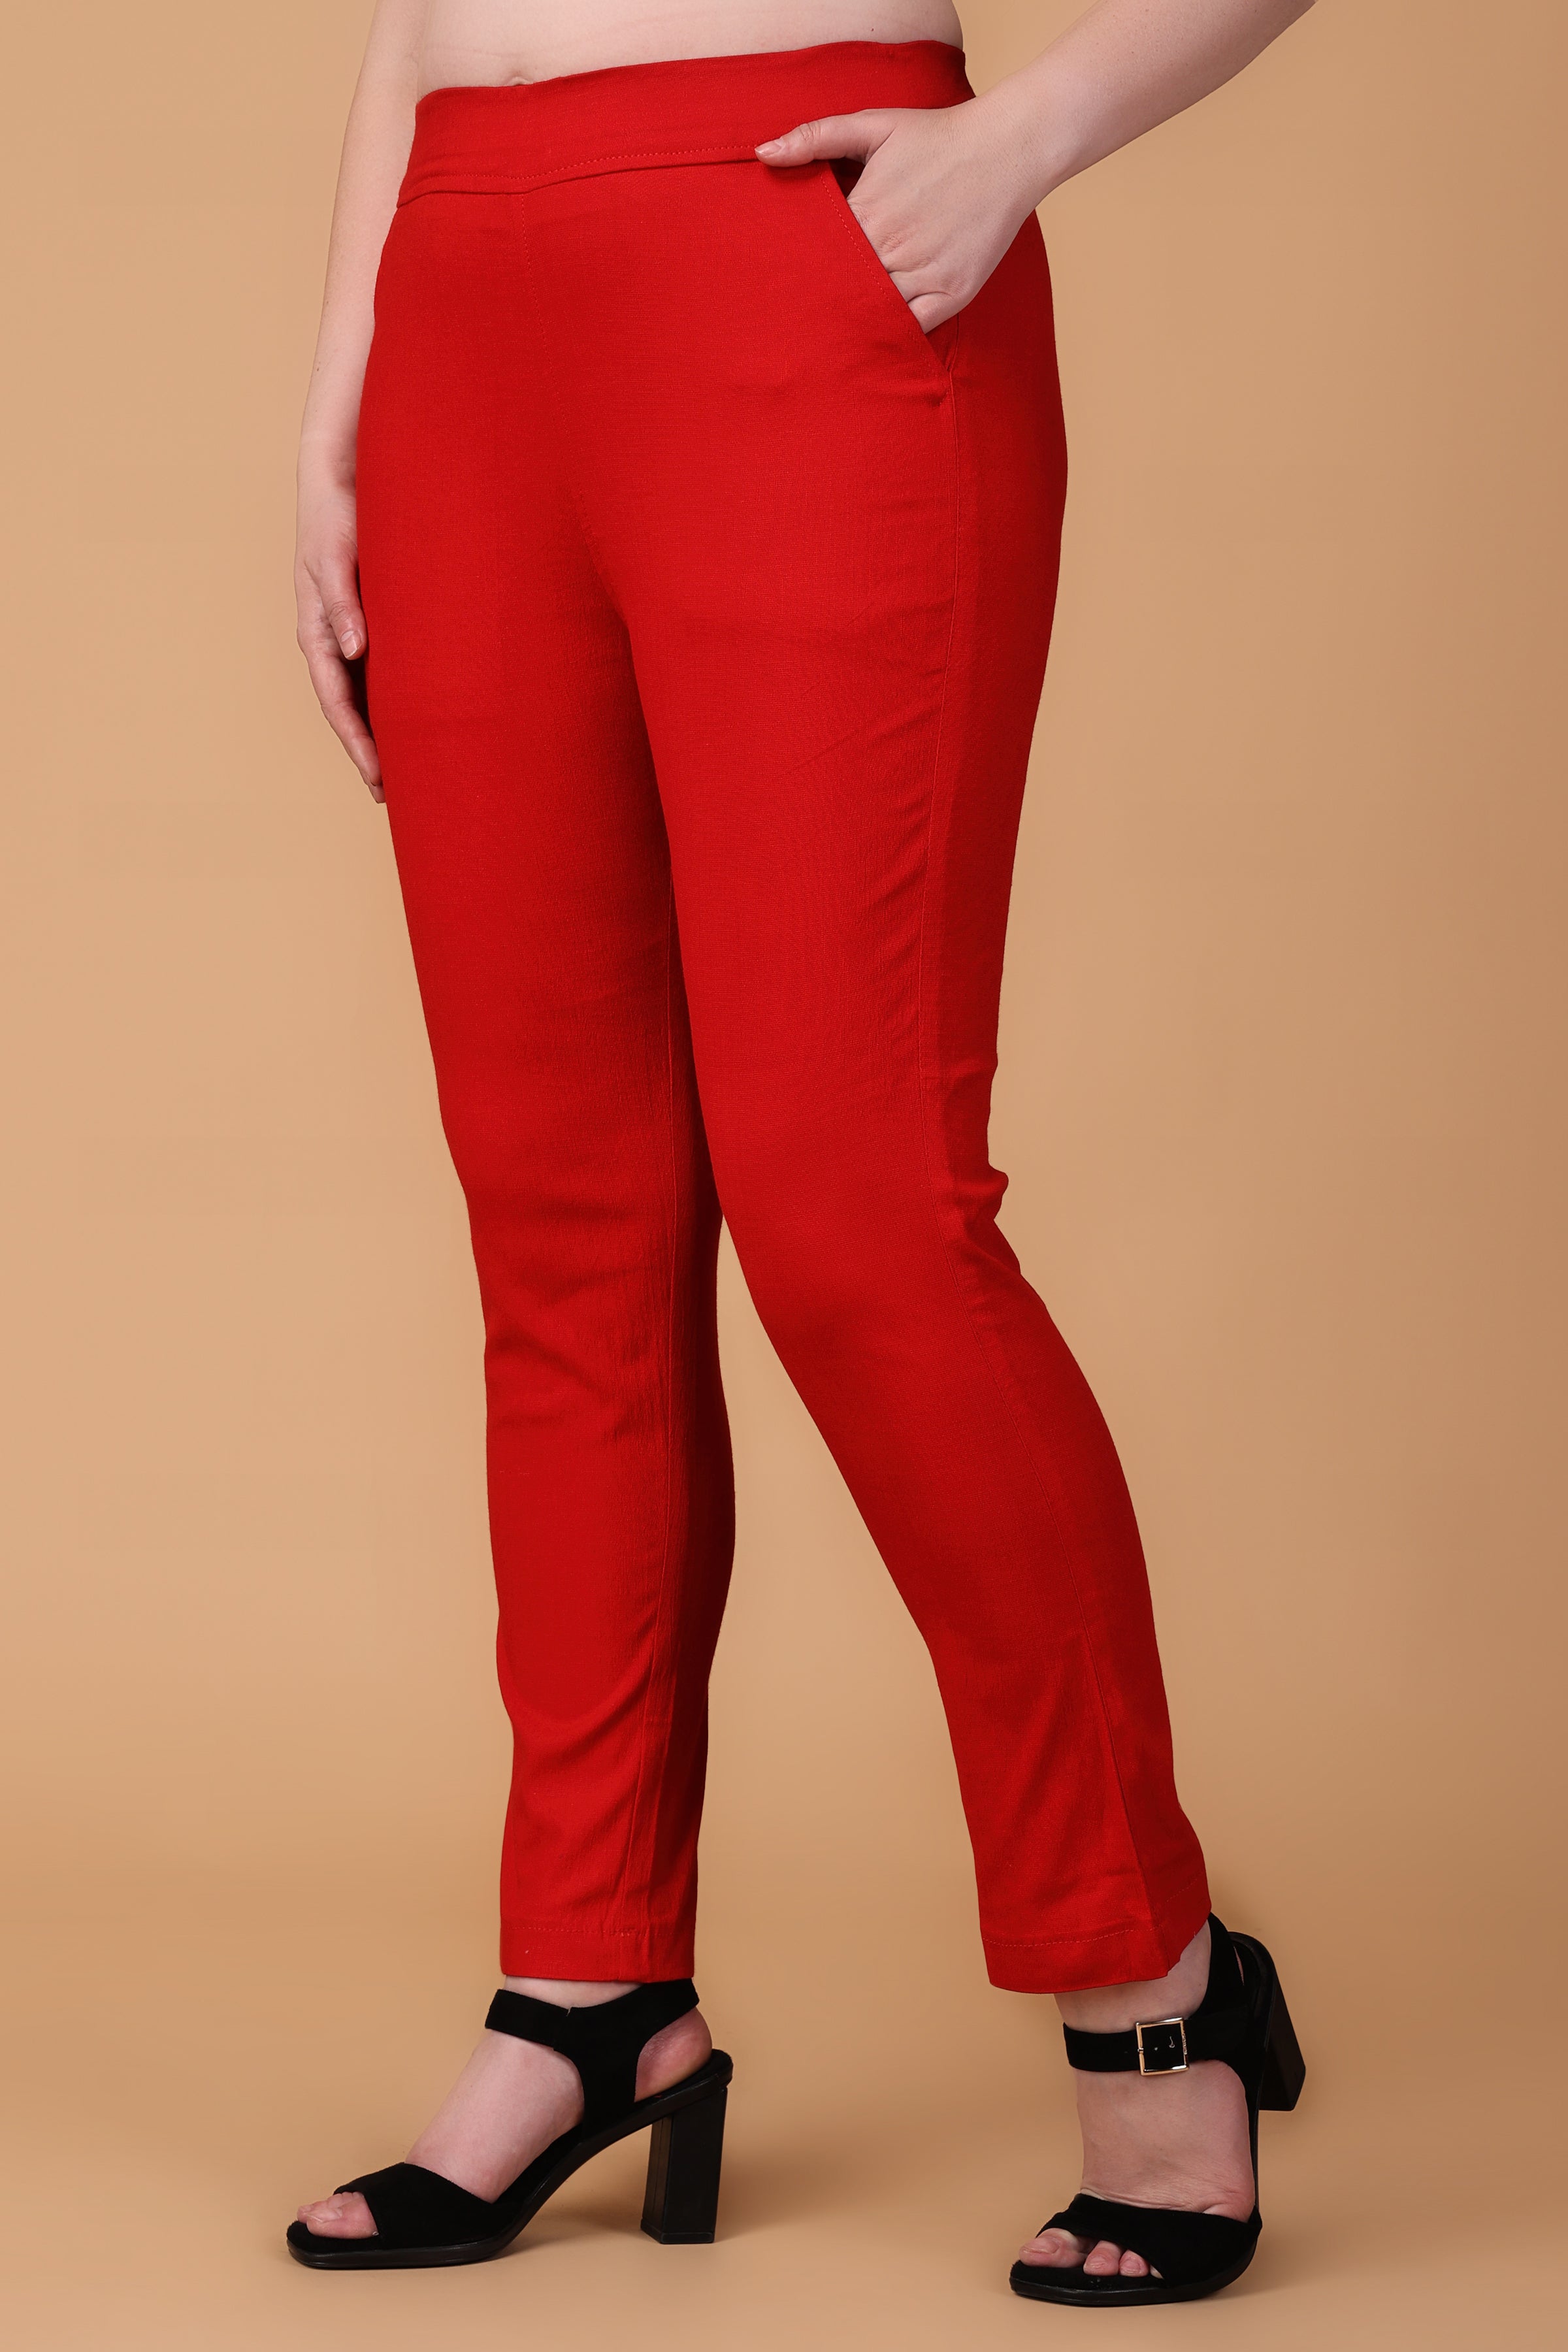 INTO THE OFFICE TROUSER - Brick Red - Pants - Fashion Nova | Professional  outfits women, Office outfits women, Professional outfits